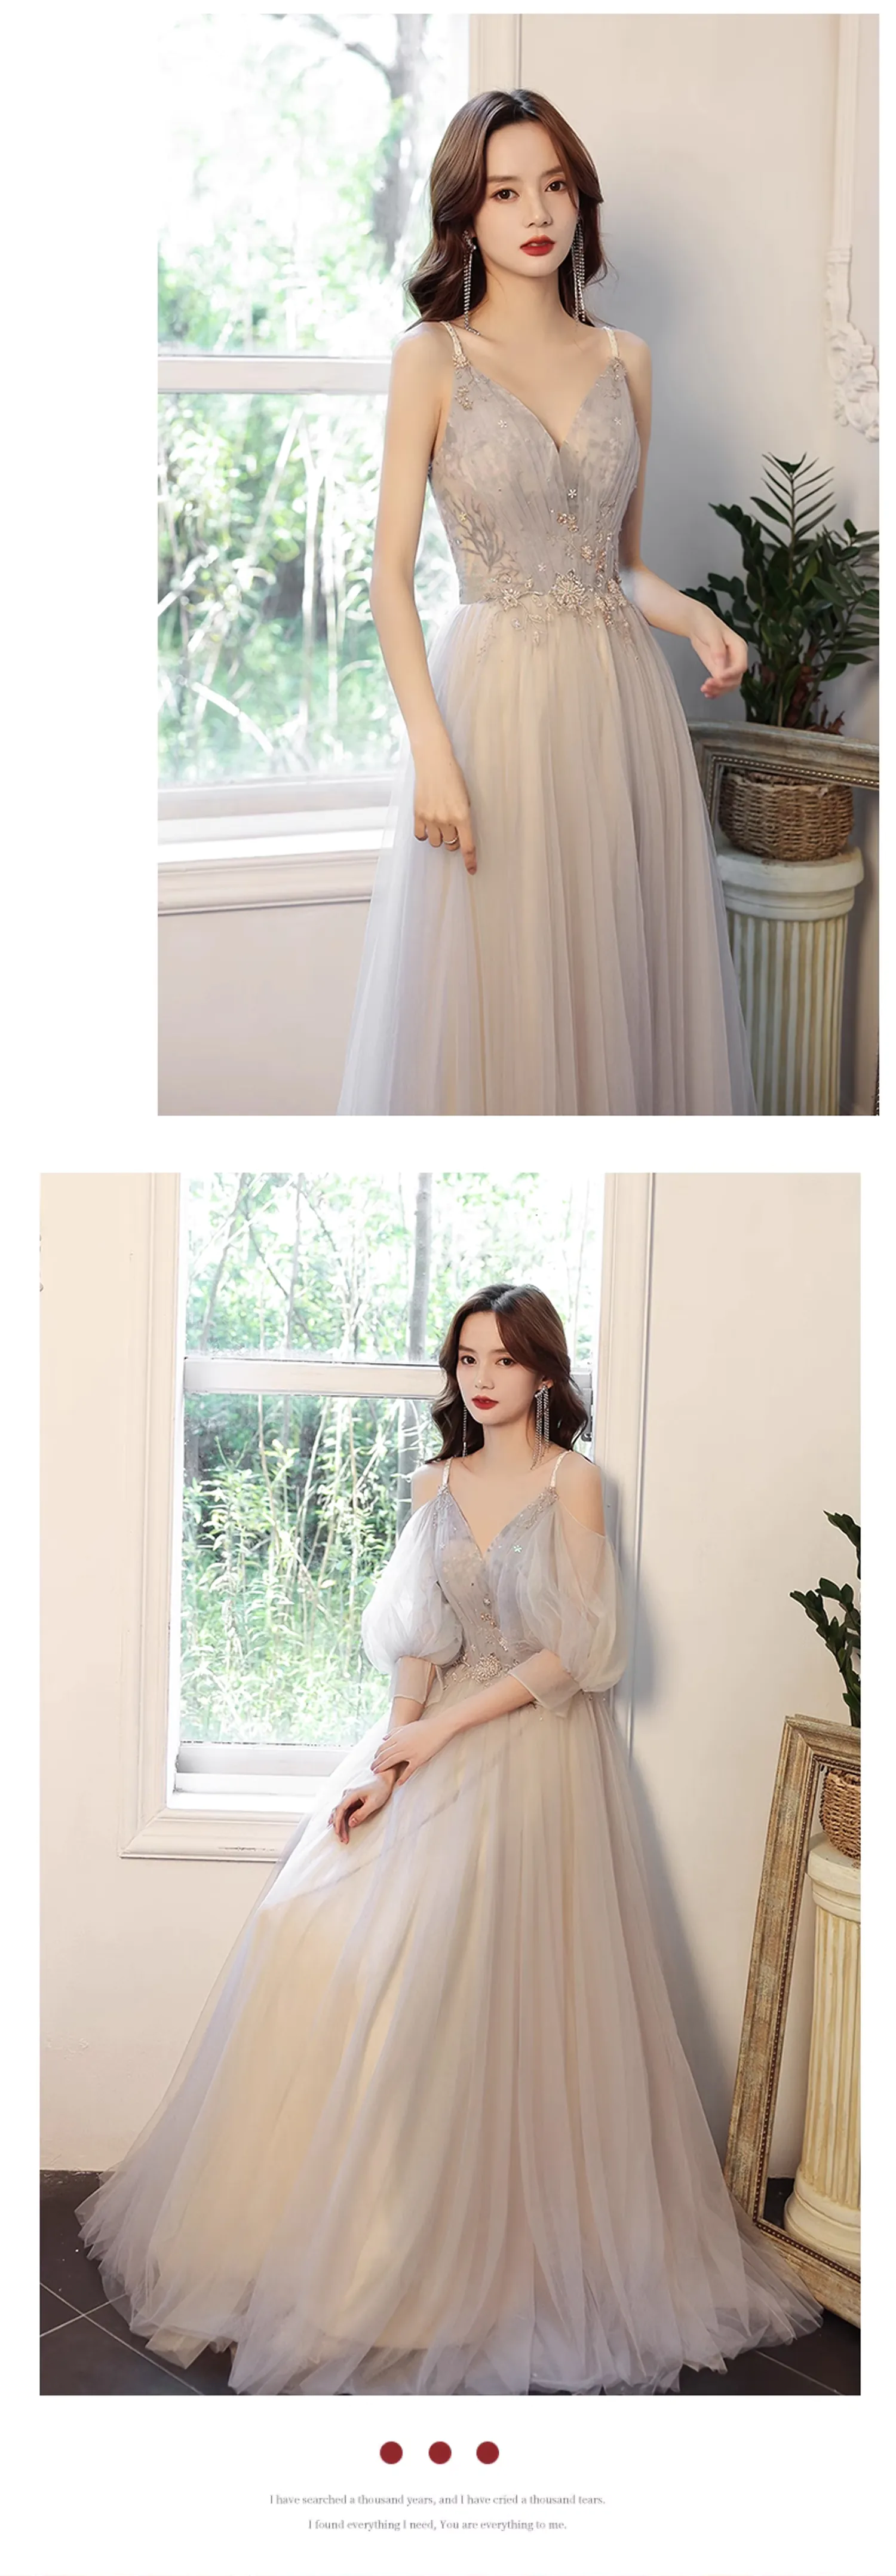 A-line-Gradient-Tulle-Embroidery-Long-Sleeve-Banquet-Prom-Dress12